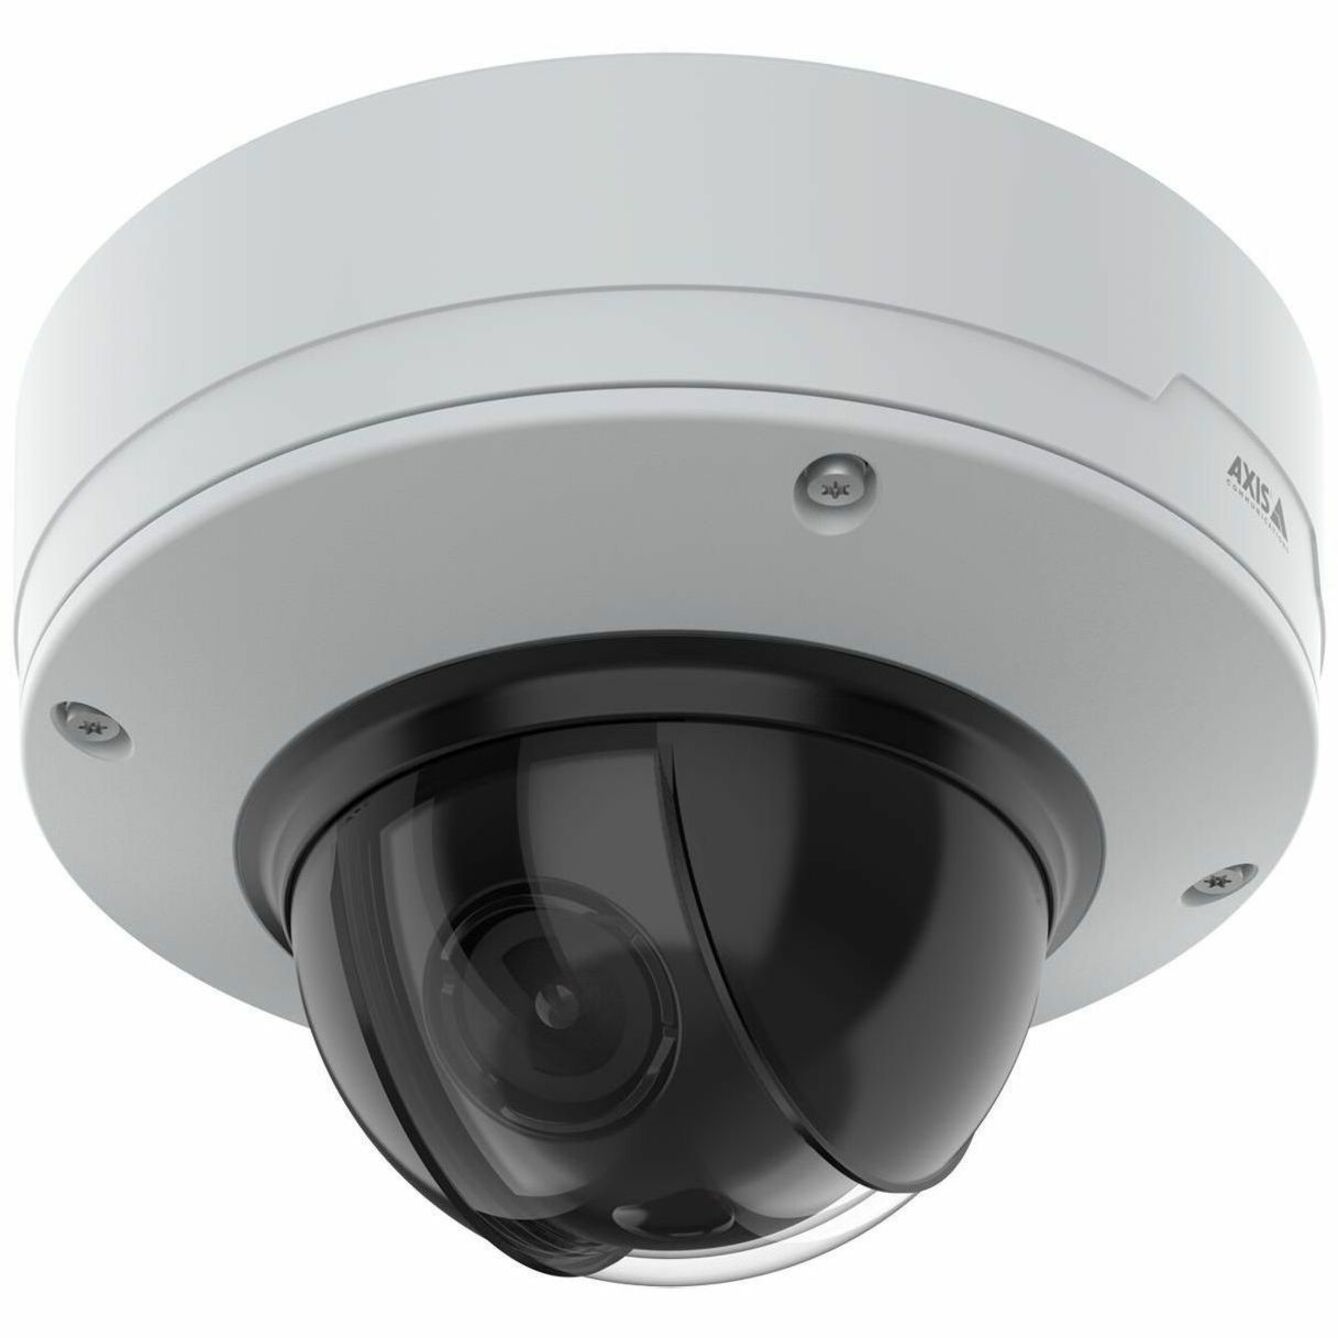 AXIS 02225-001 Q3538-LVE Network Camera, 8 Megapixel Outdoor 4K Dome, Built-in Infrared Illuminator, Wide Dynamic Range, Day/Night, TAA Compliant